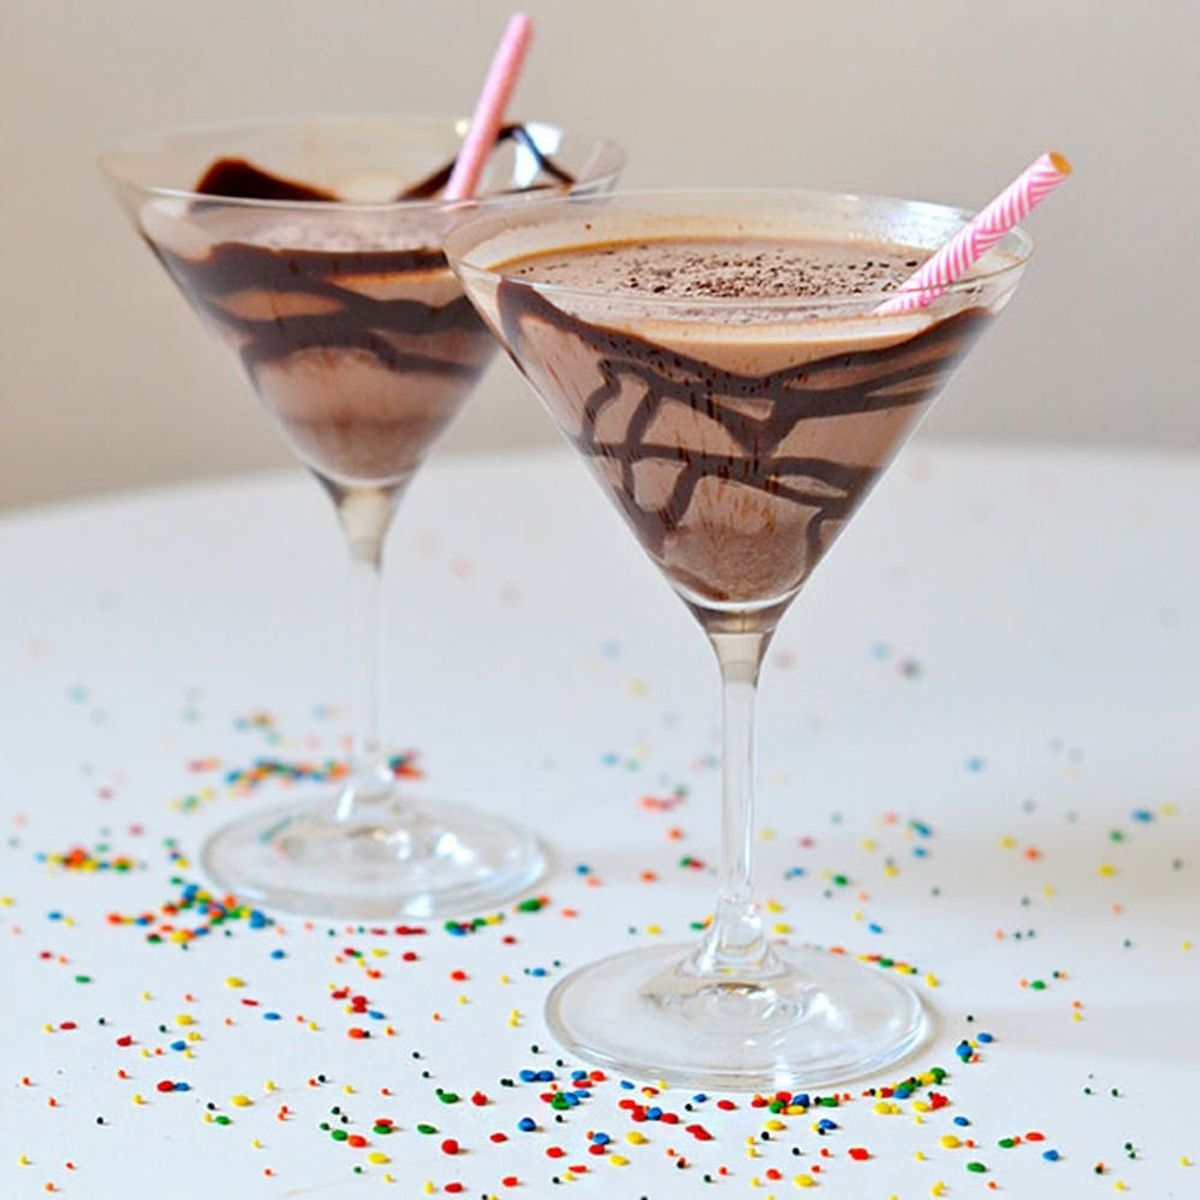 How to Make a Chocolate Martini That Tastes like Heaven in a Glass